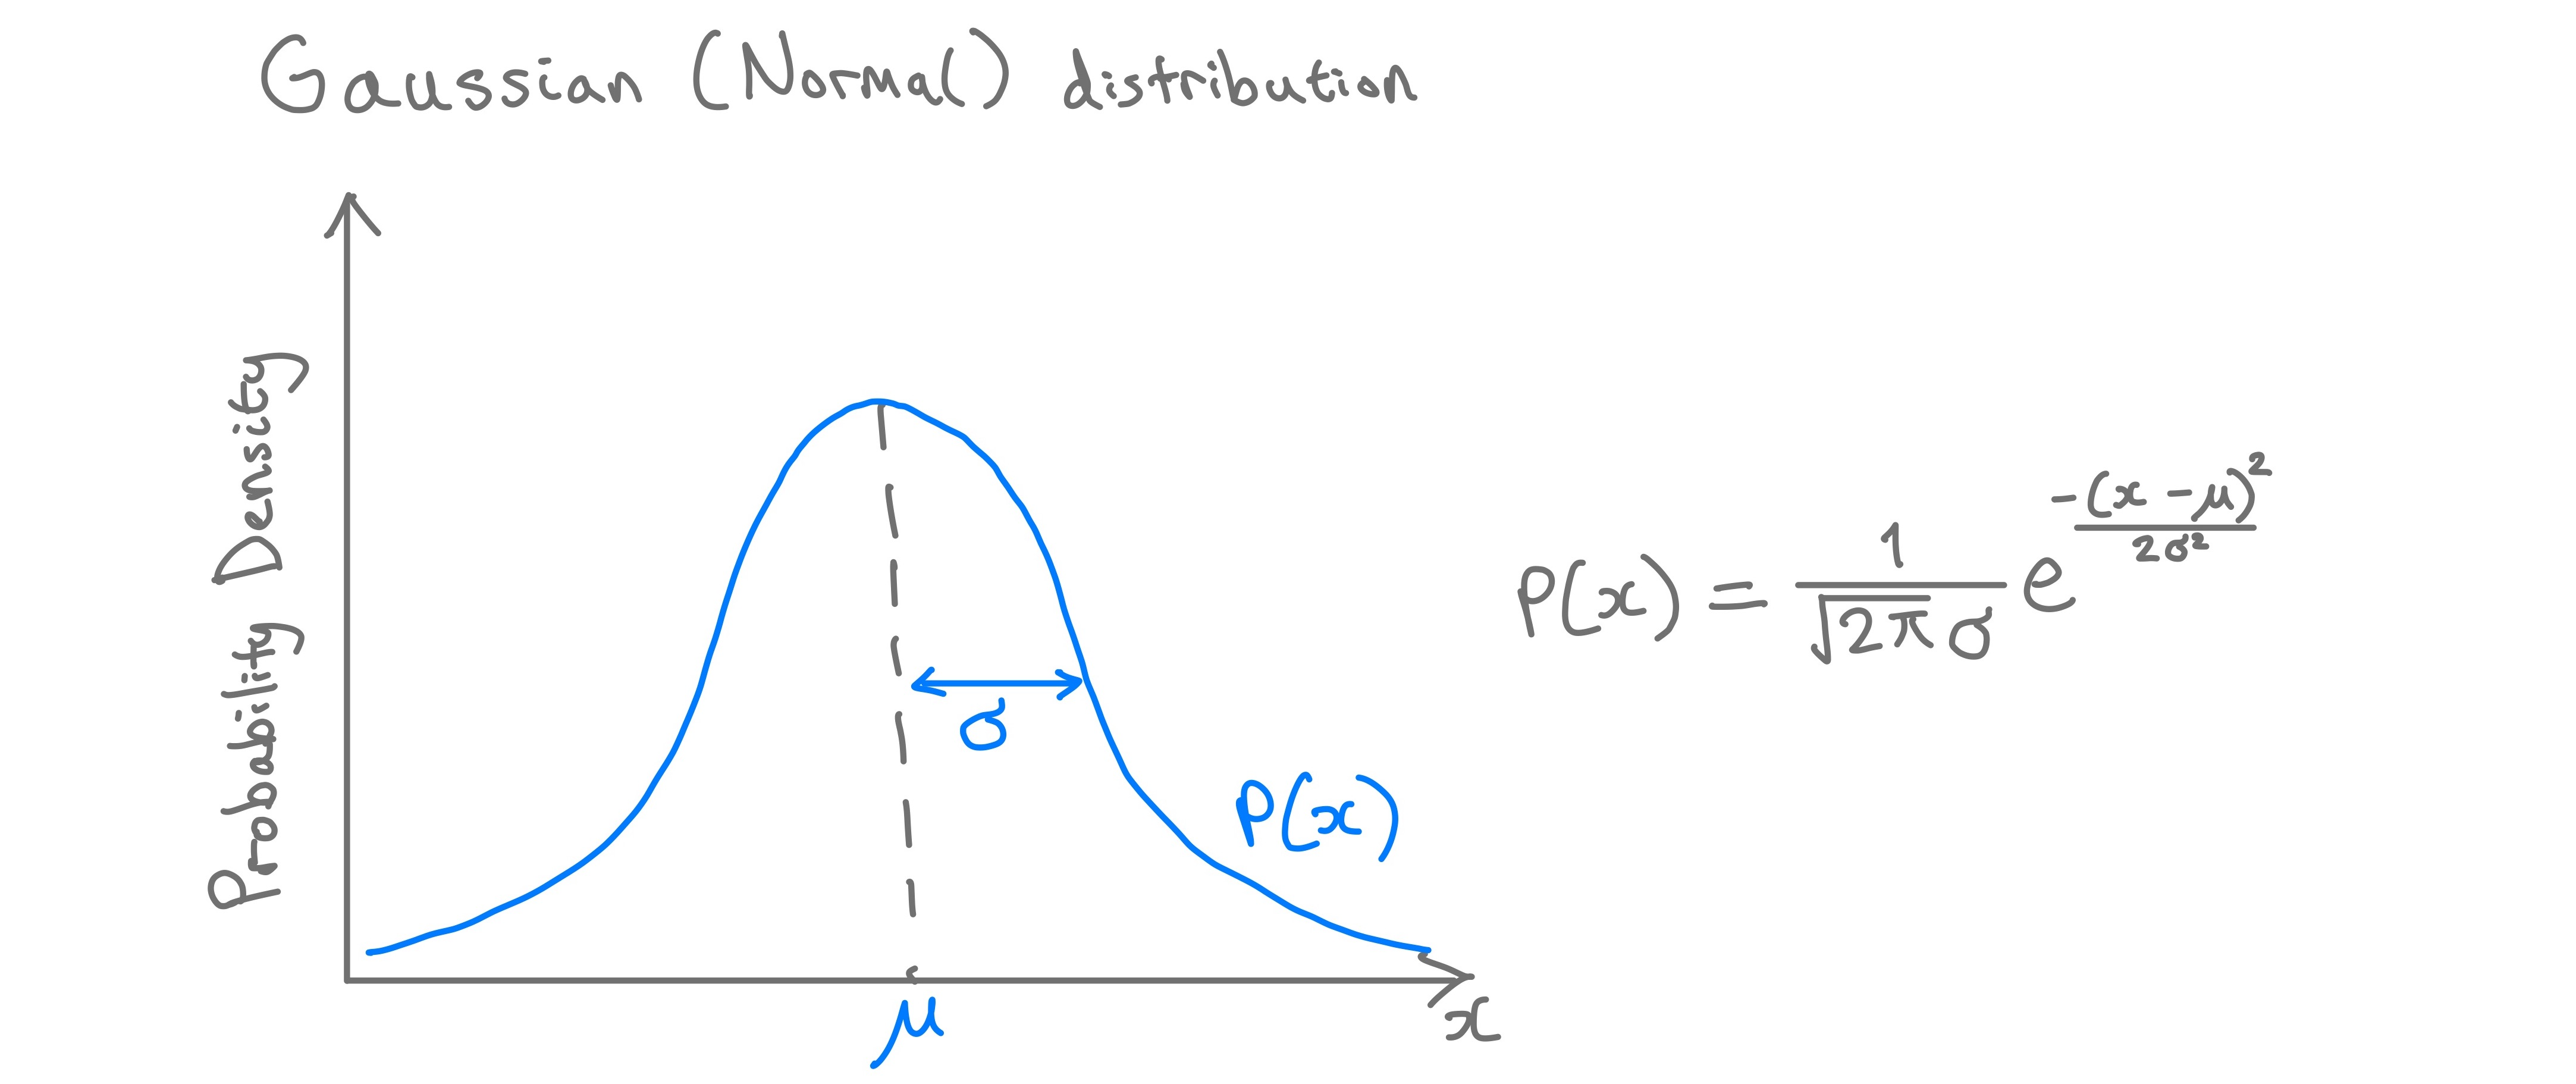 Gaussain distribution and  formula. Image by author.